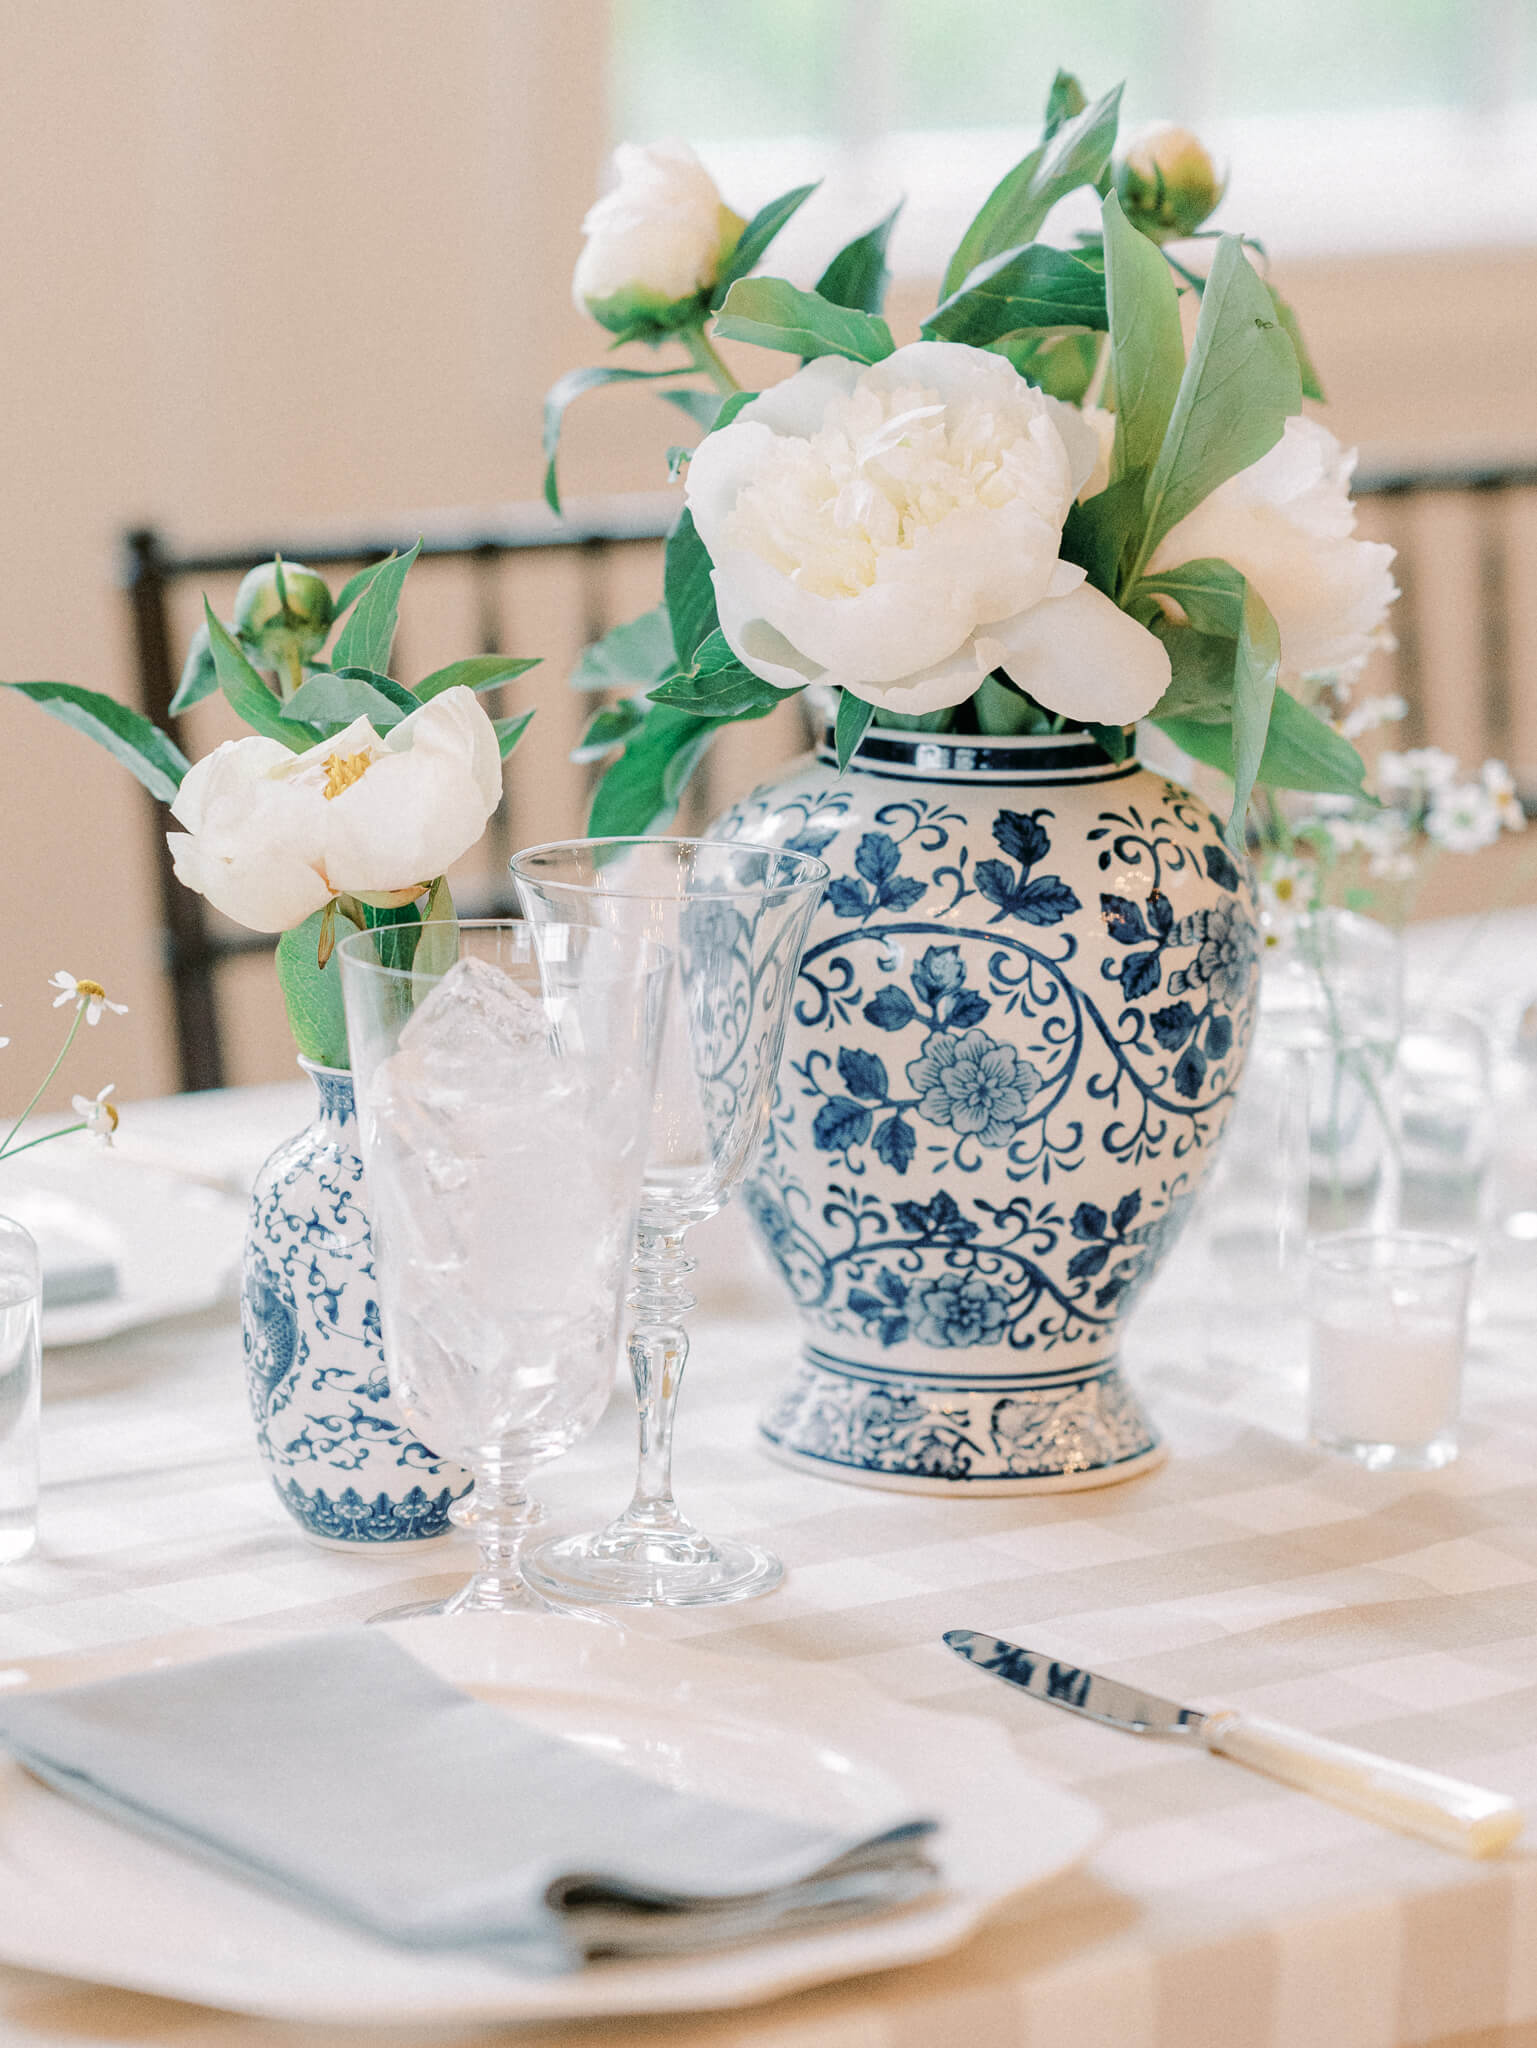 Closeup tablescape with a gingham table cloth and blue chinoiserie vases and white flowers